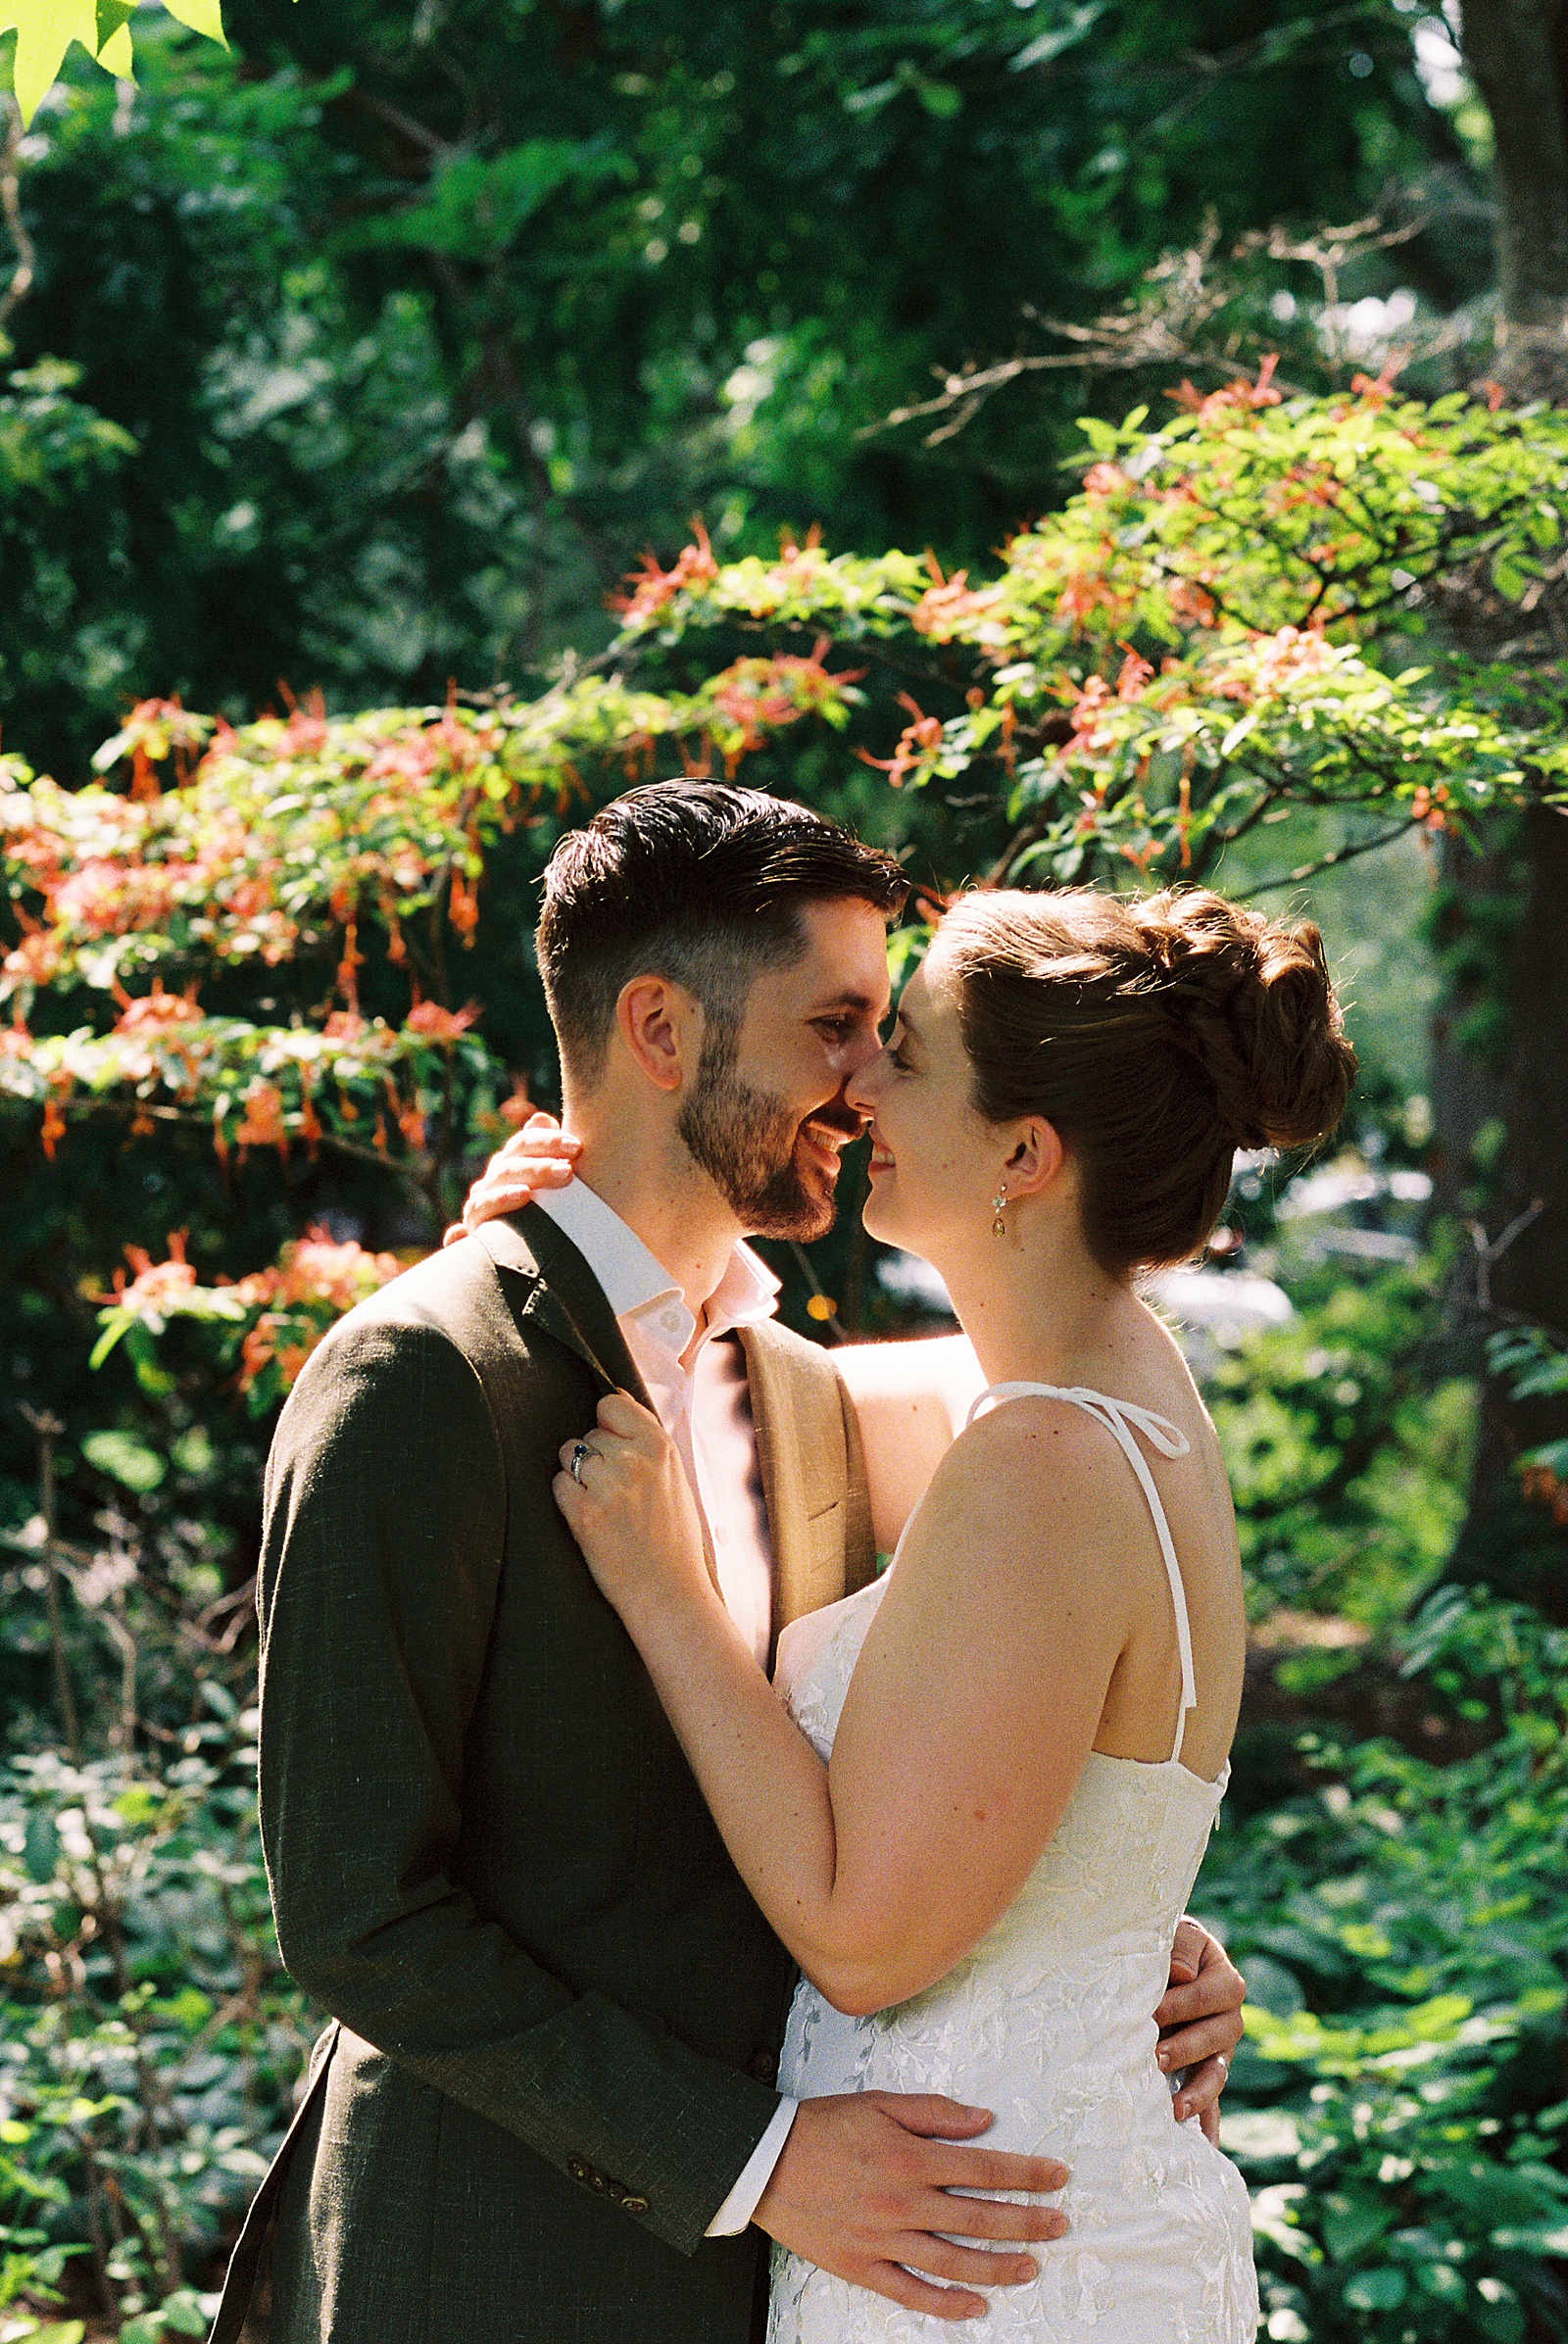 A bride and groom kiss in a Philadelphia garden on film photography.